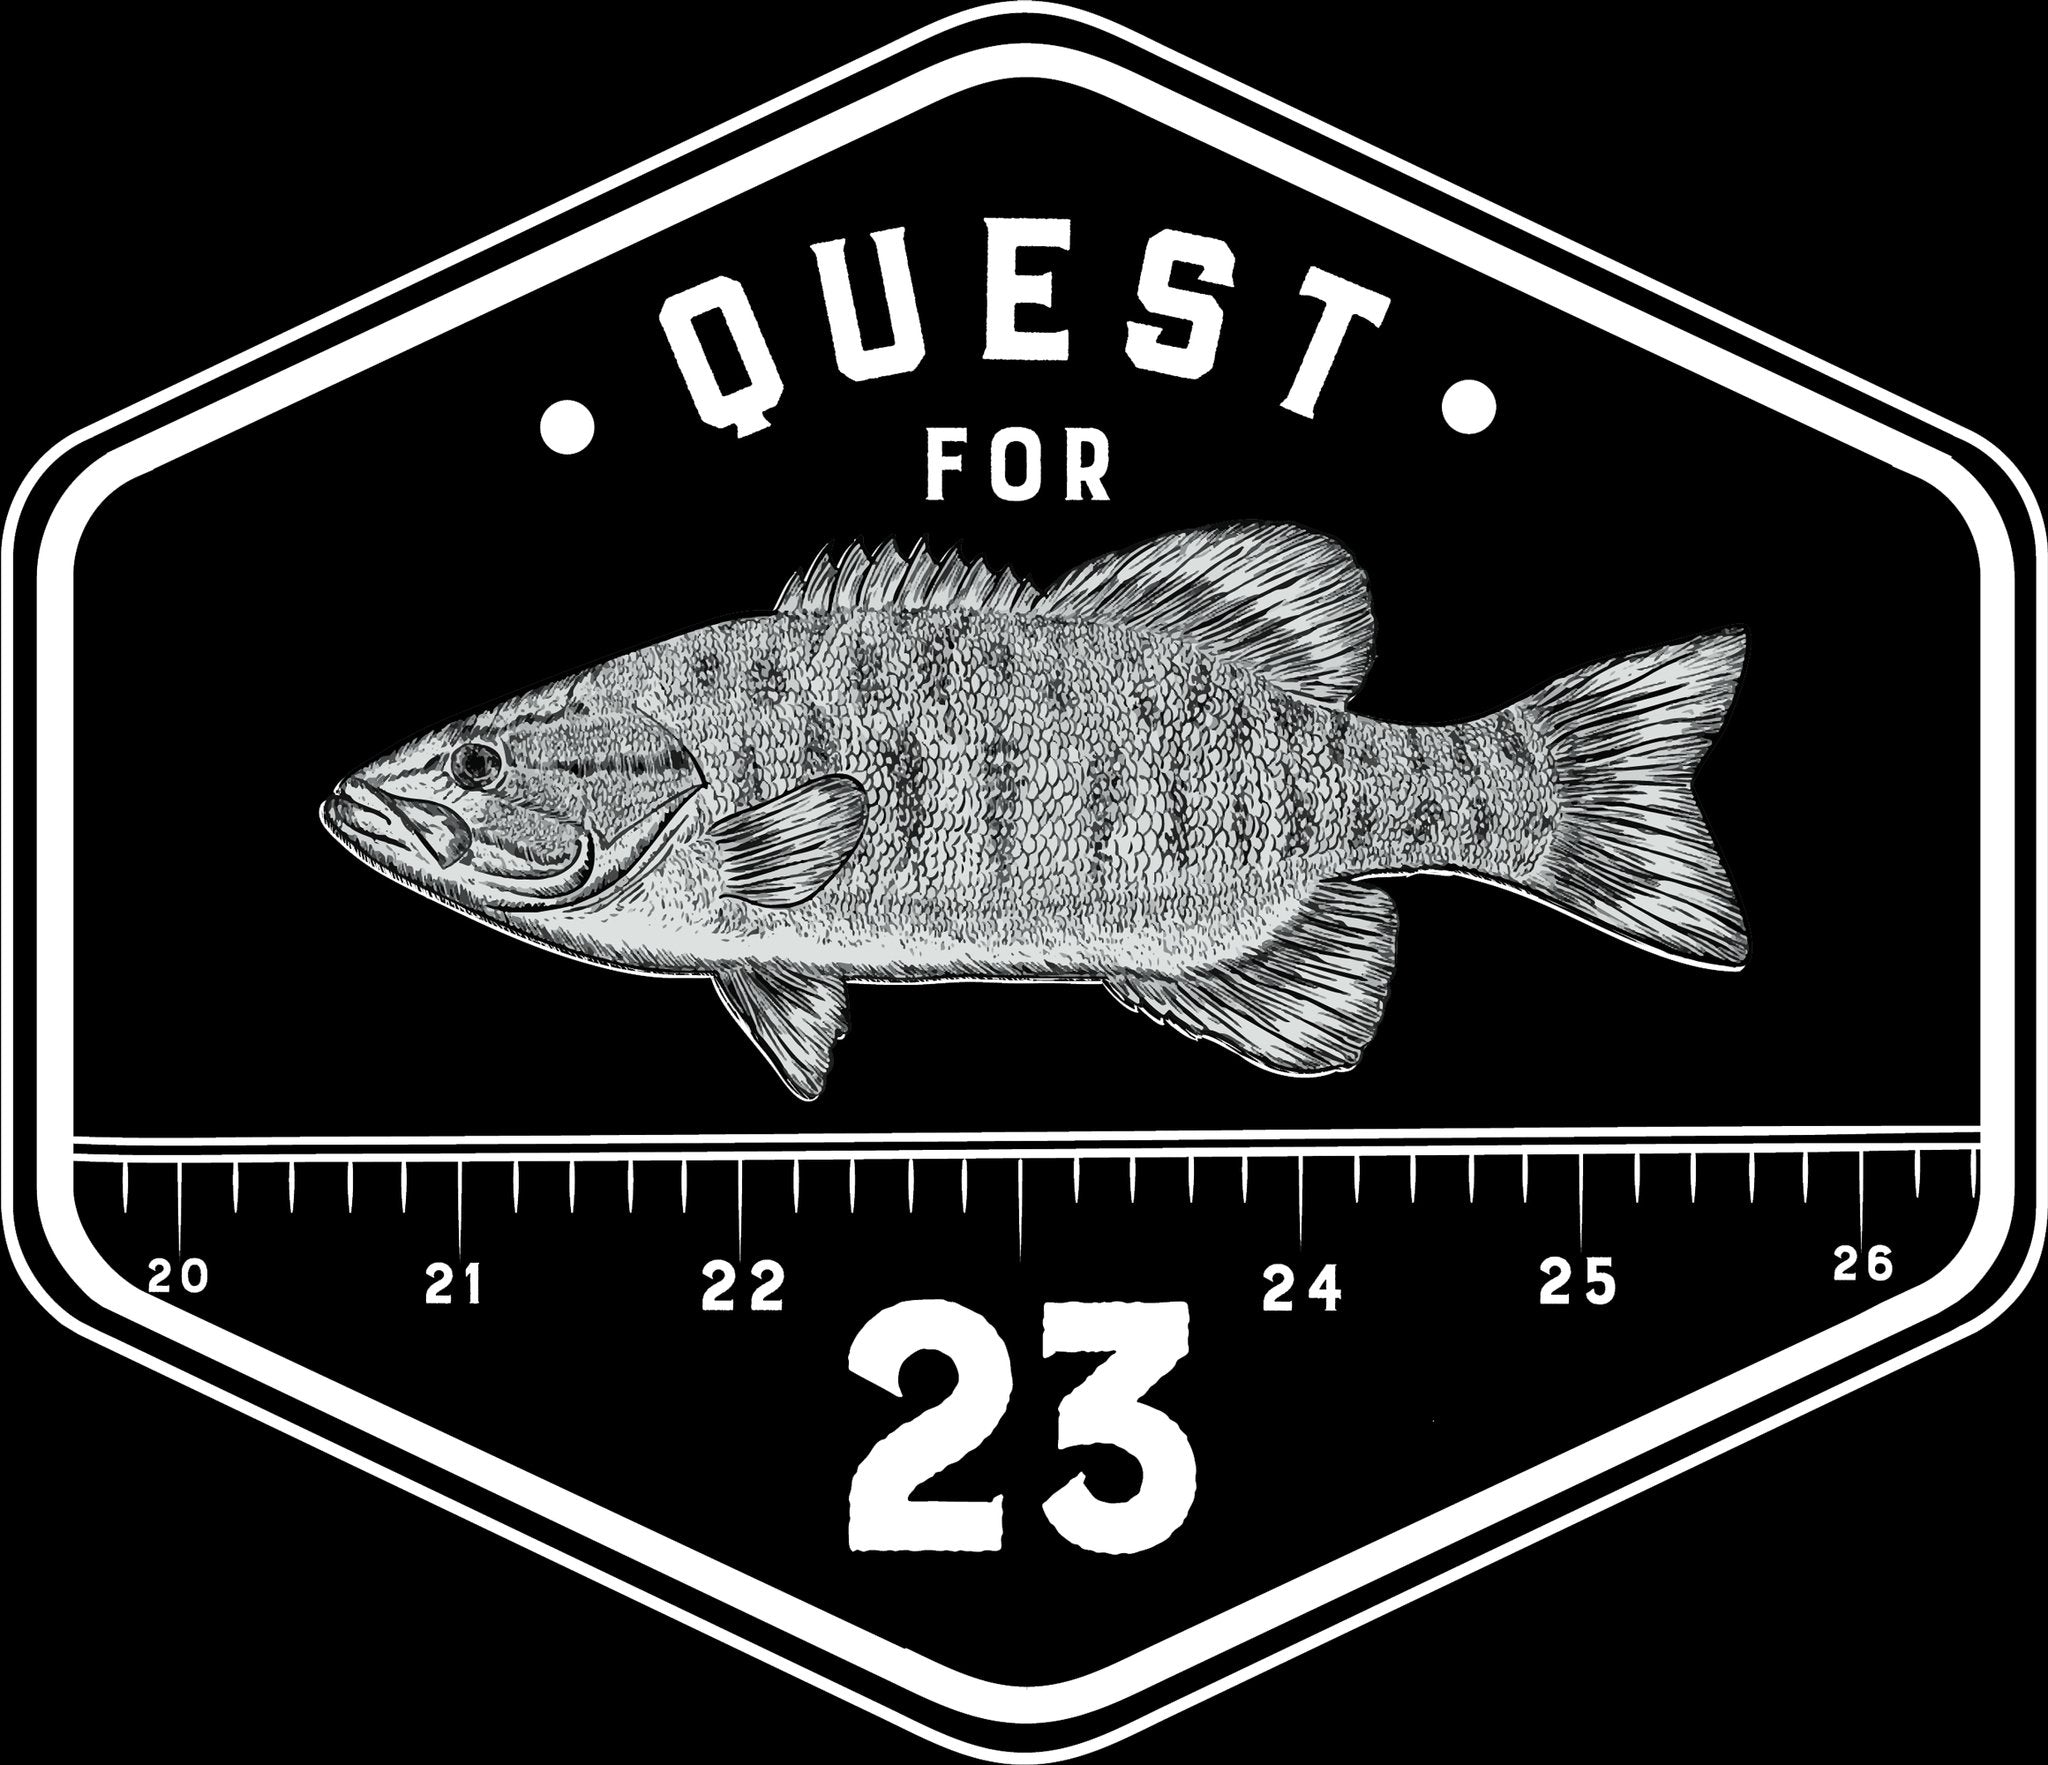 Achigan Quest for 23 Tee - Hamilton Bait and Tackle